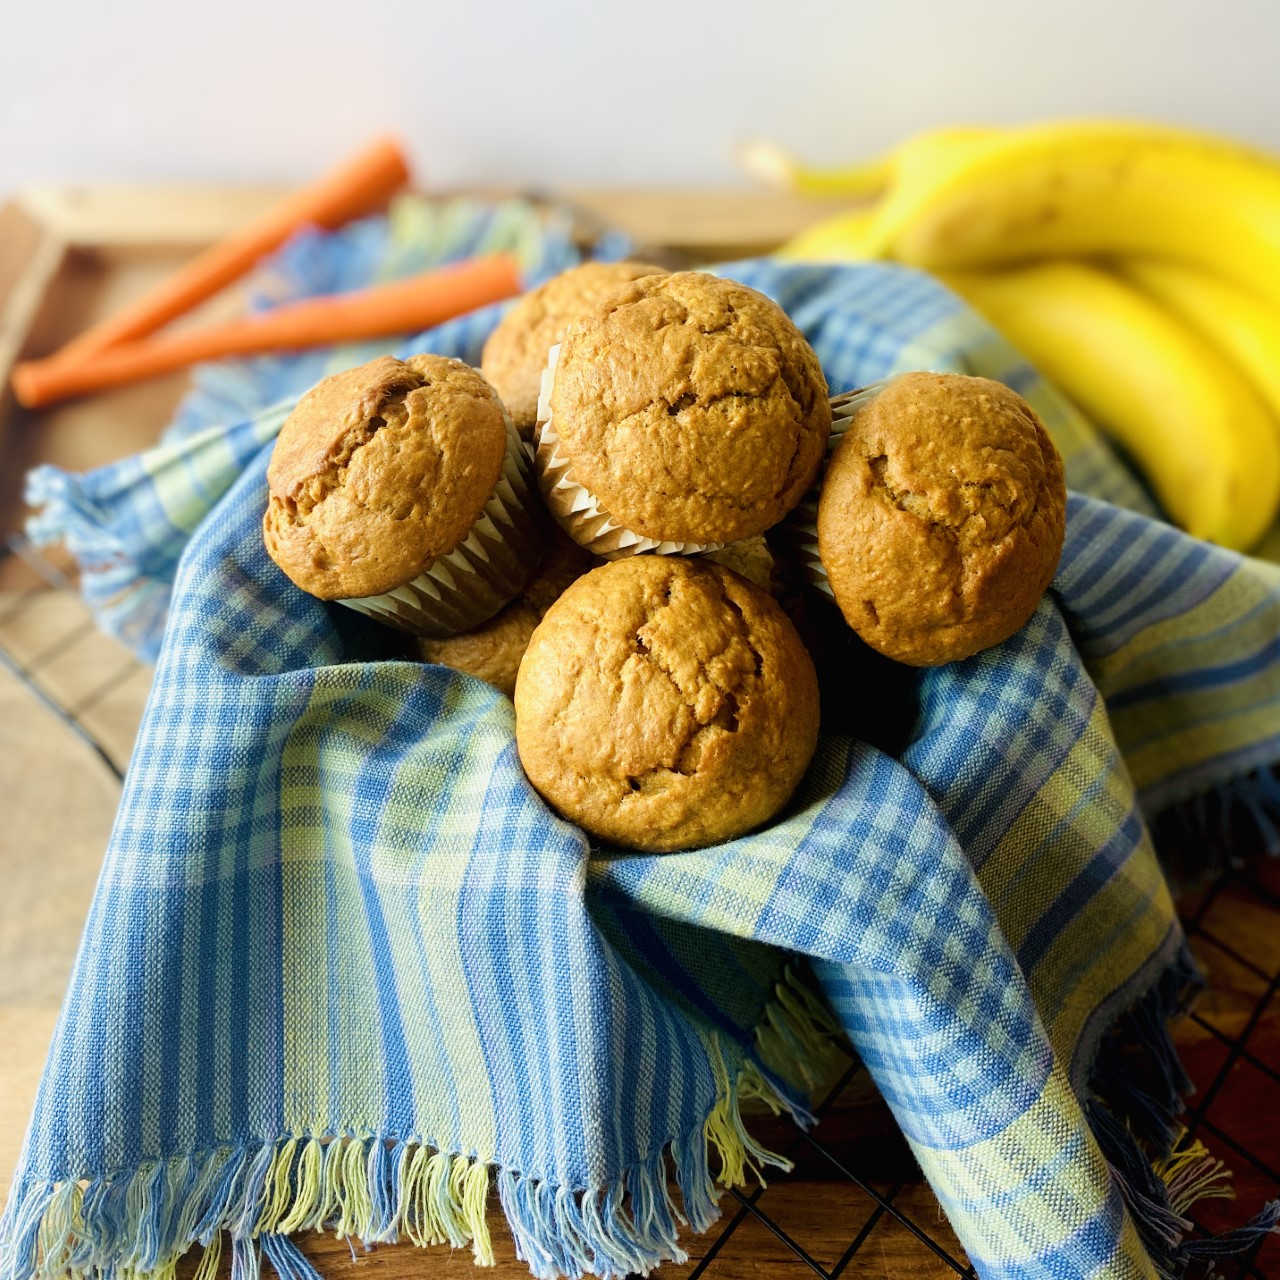 banana carrot muffins in basket with carrot and banana in background